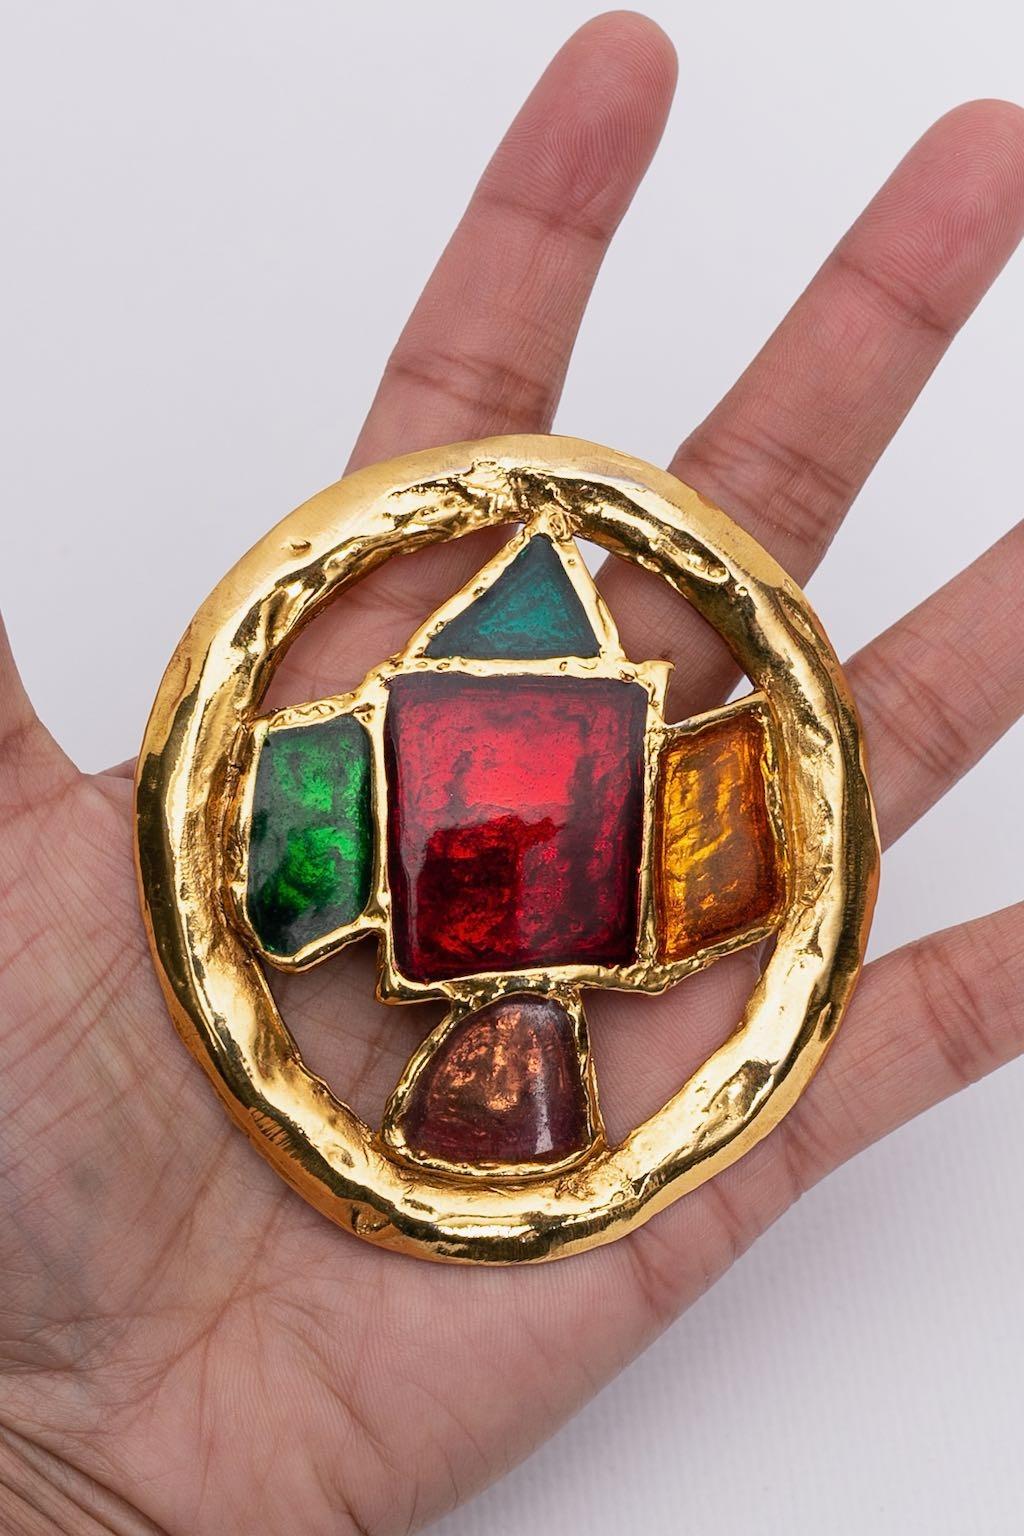 Hanae Mori - Gilted metal hammered and enamelled brooch.

Additional information:
Condition: Very good condition
Dimensions: 8 cm (3.15 in) x 7 cm (2.76 in)

Seller Reference: BR11
